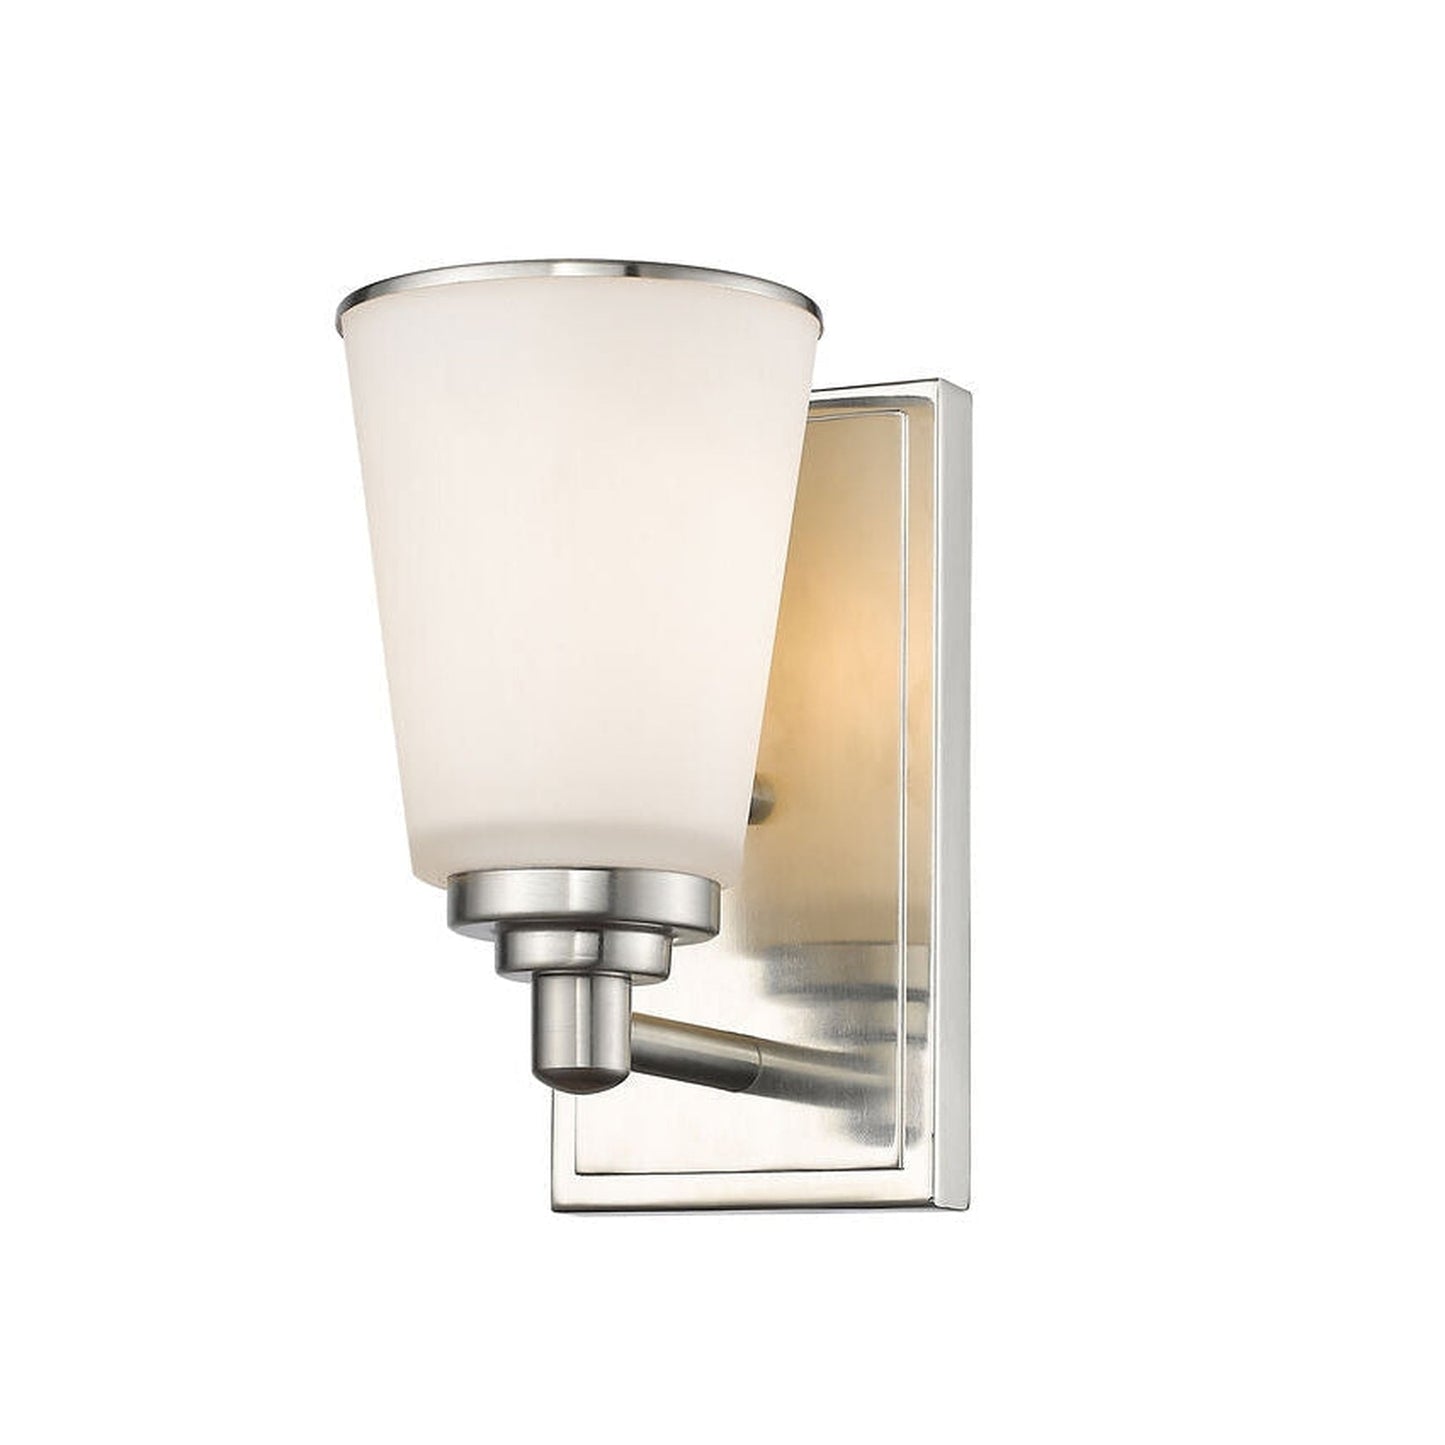 Z-Lite Jarra 5" 1-Light Brushed Nickel Wall Sconce With Matte Opal Glass Shade